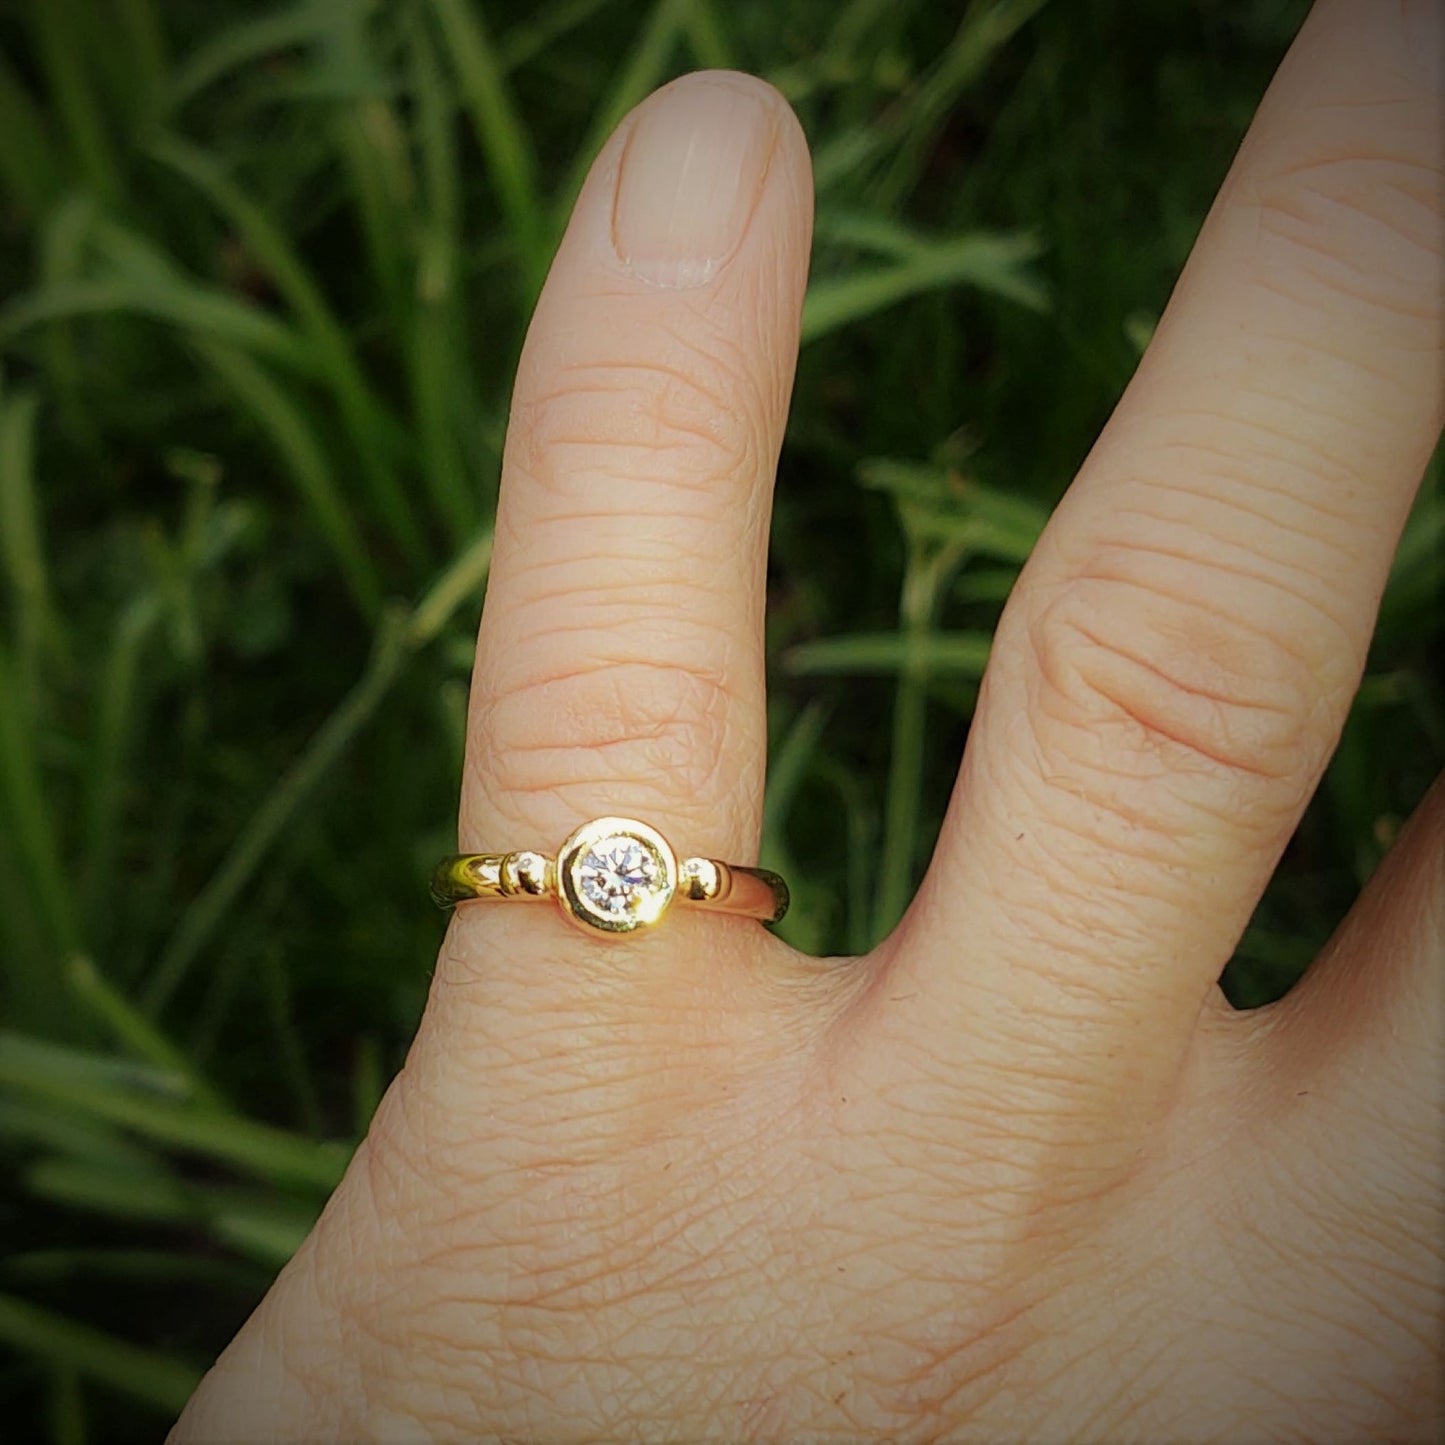 22ct gold and a 0.34ct Cultured Diamond with IGI certificate, environmentally and ethically responsible handmade ring by Adrian Ashley.